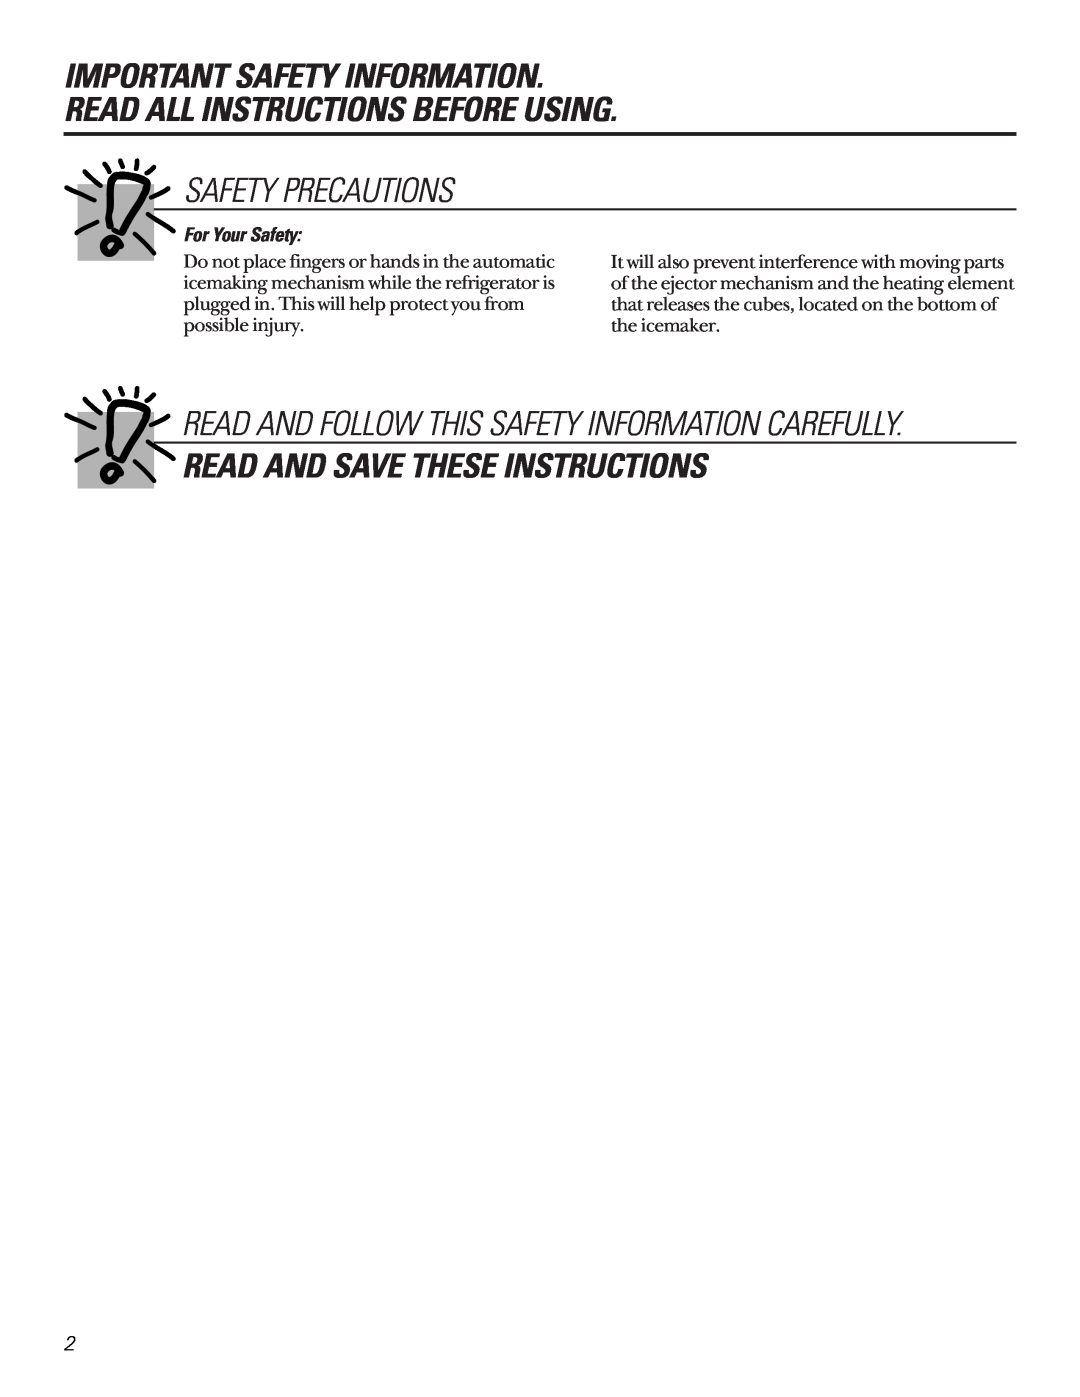 GE UK-KIT-3S Read And Save These Instructions, Safety Precautions, Read And Follow This Safety Information Carefully 